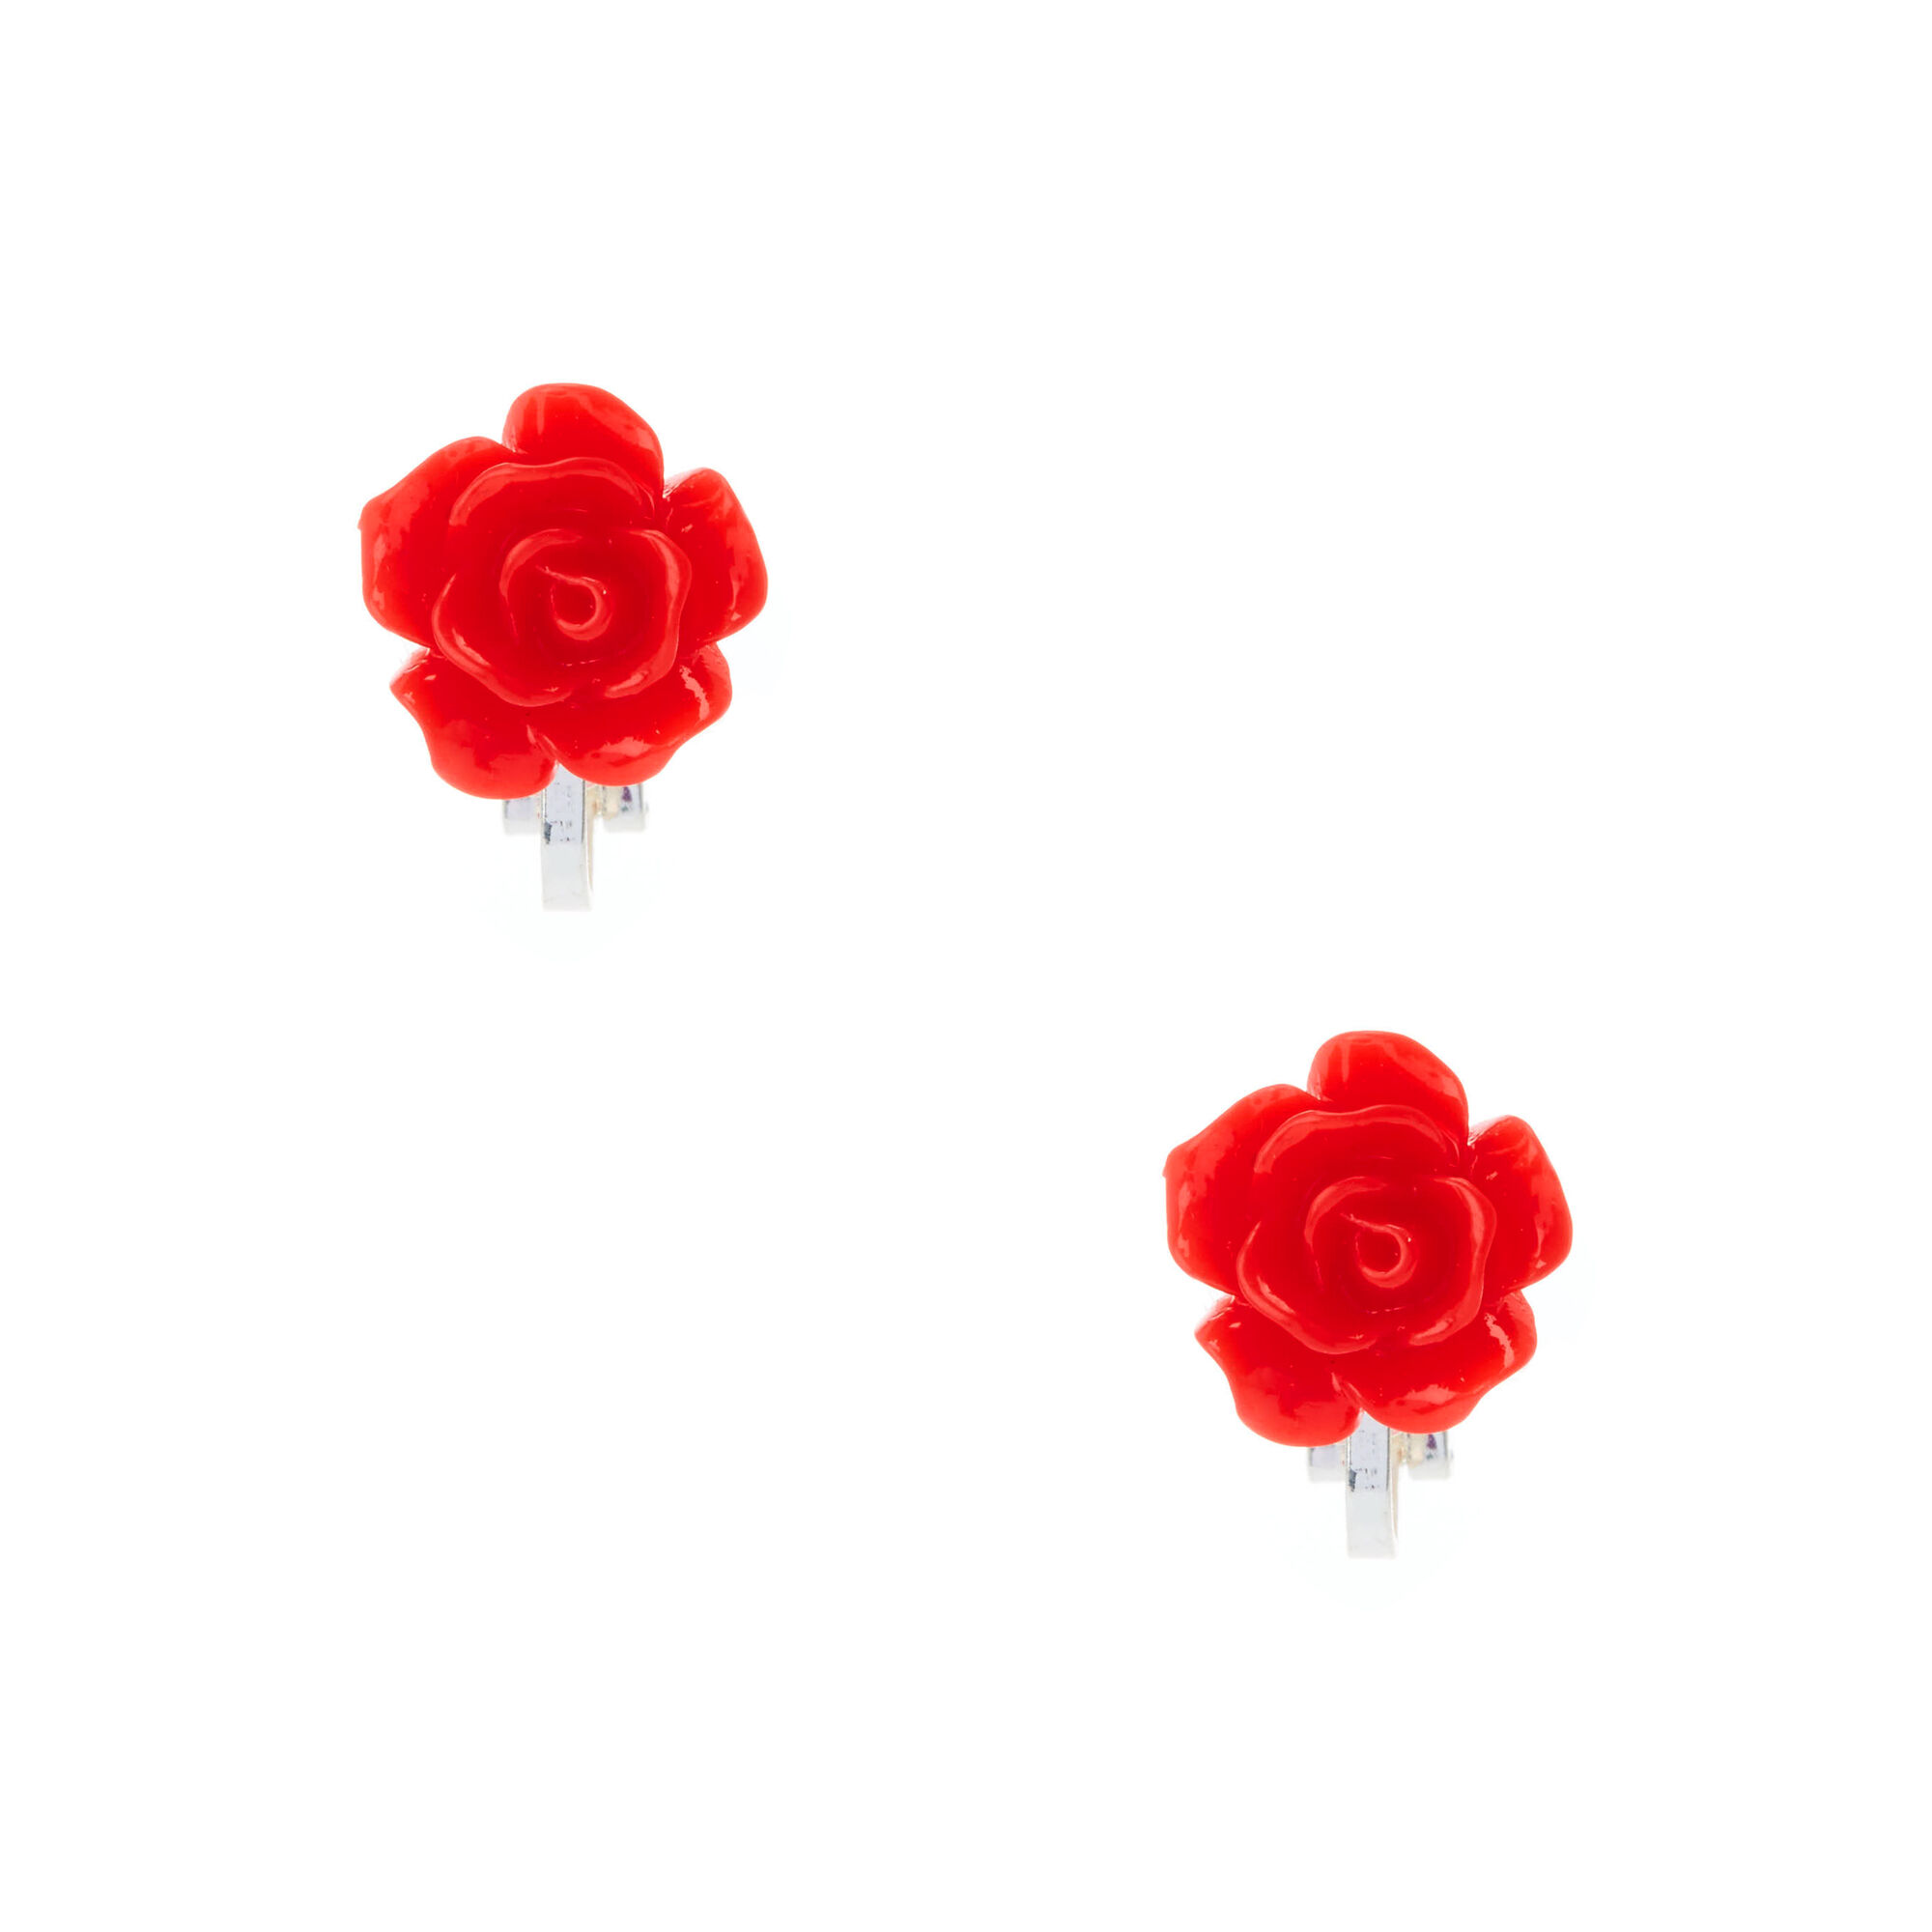 View Claires SilverTone Rose Clip On Stud Earrings Red information